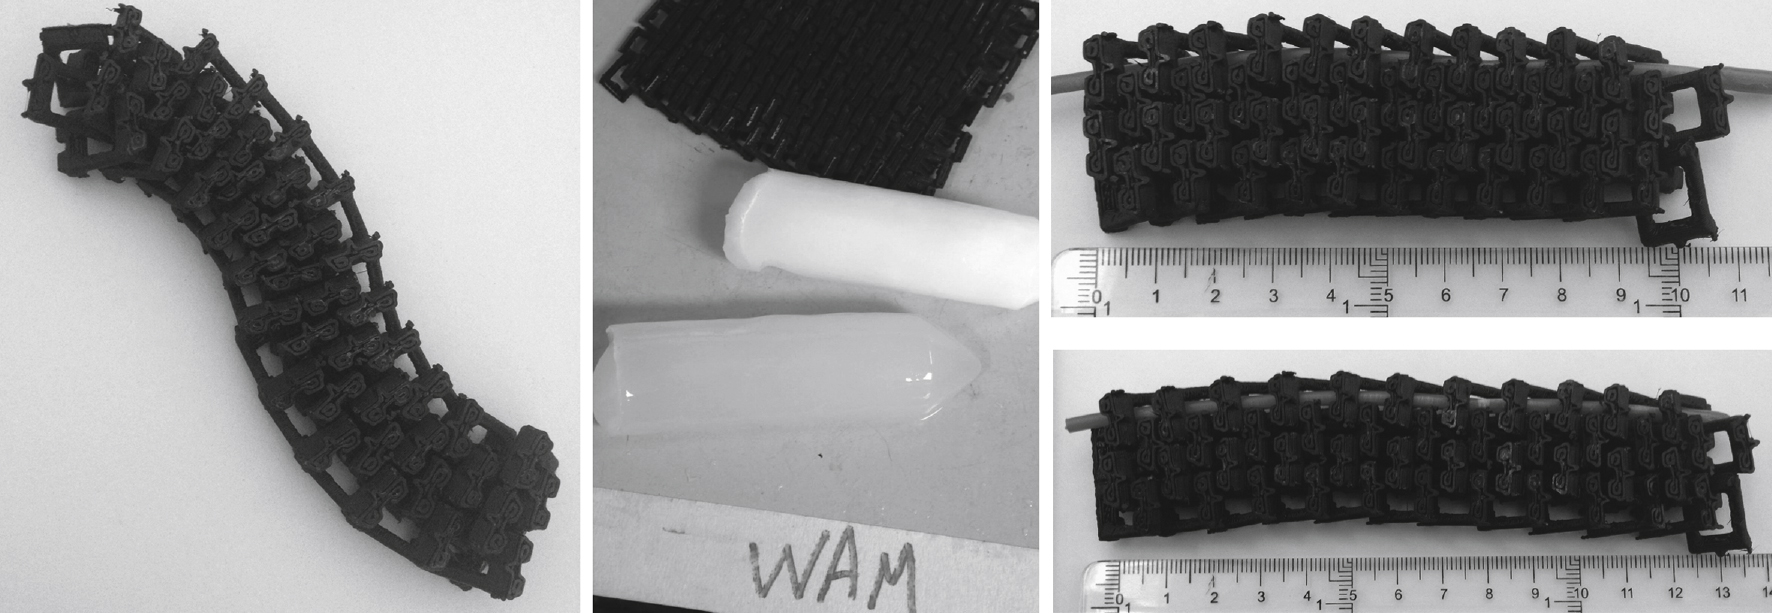 Experiments on 3D printing technologies, from left to right: 3D printed flexible chain mail, it has no motion for itself; possible joining combinations of chain mail with other sensitive materials; theoretical opening or closure of chain mail triggered through the temperature changes of sensitive plastic, it is a reactive structure with motion for itself.